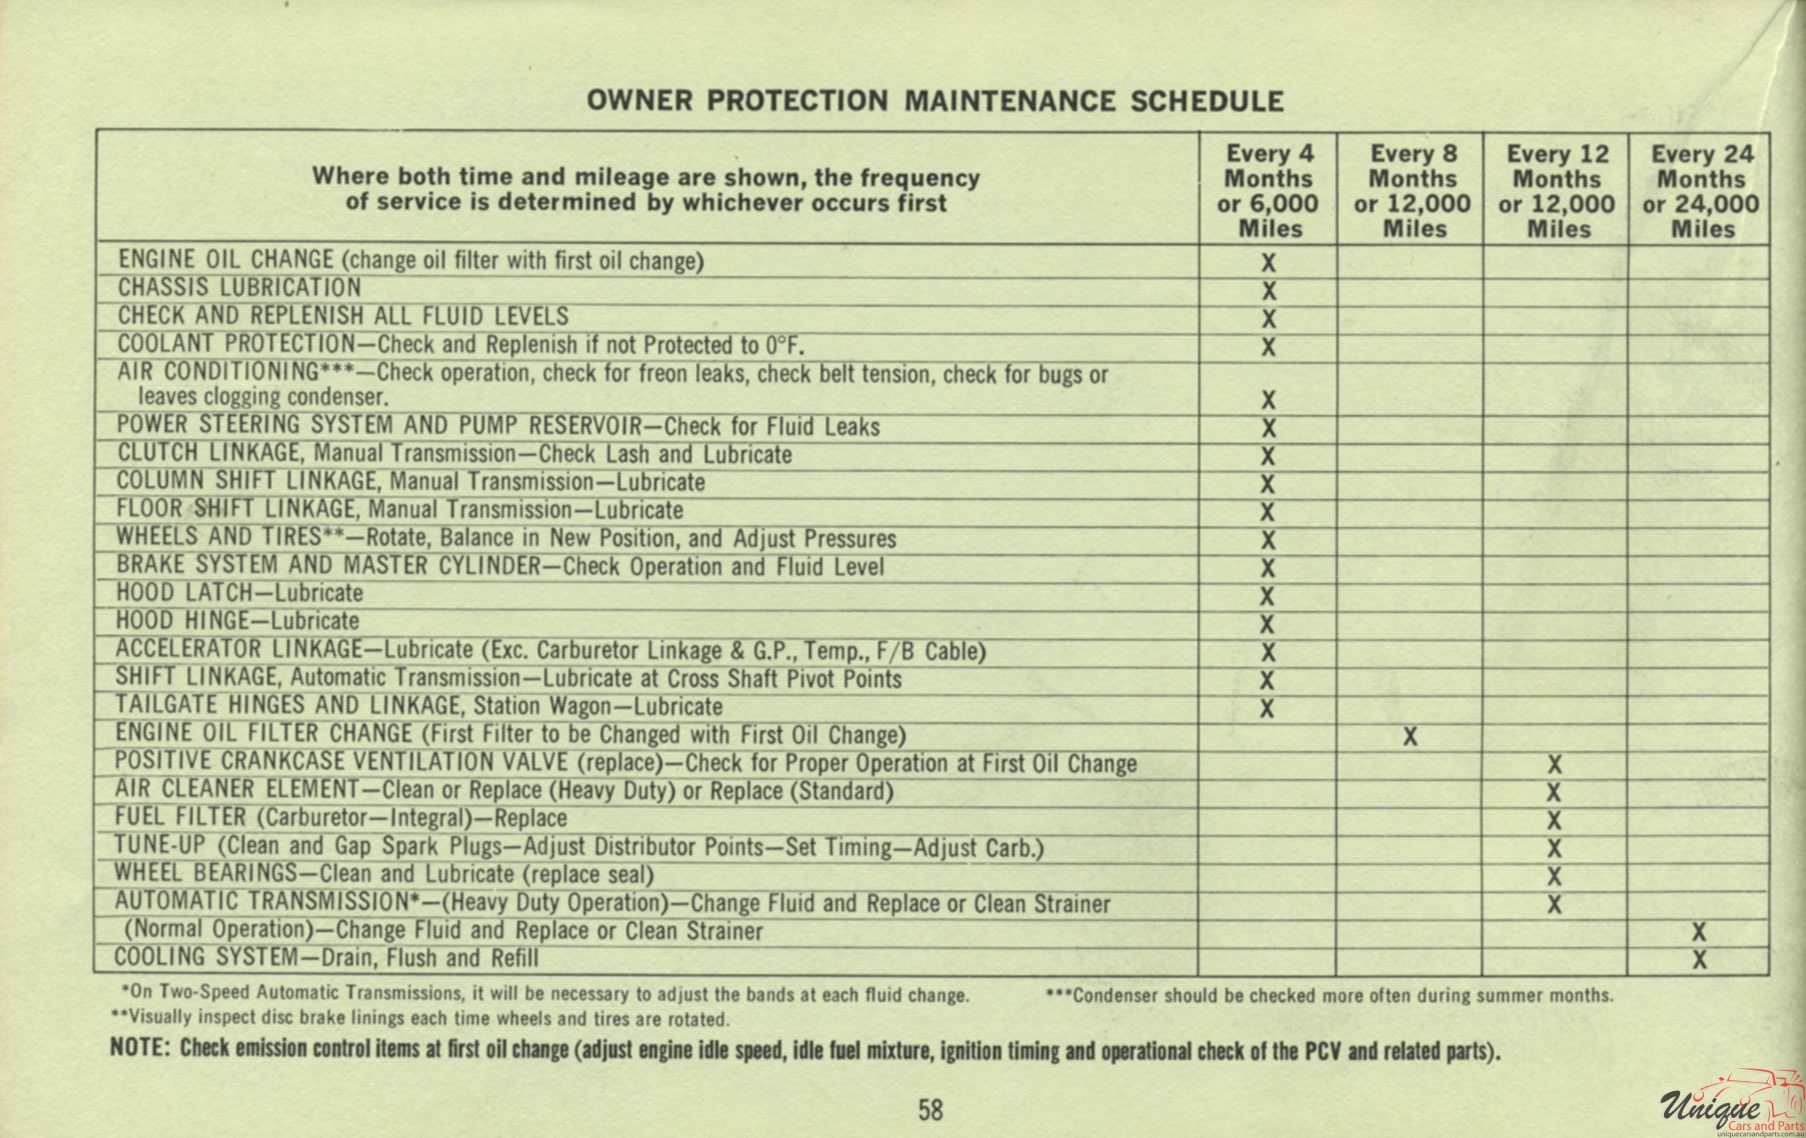 1969 Pontiac Owners Manual Page 70